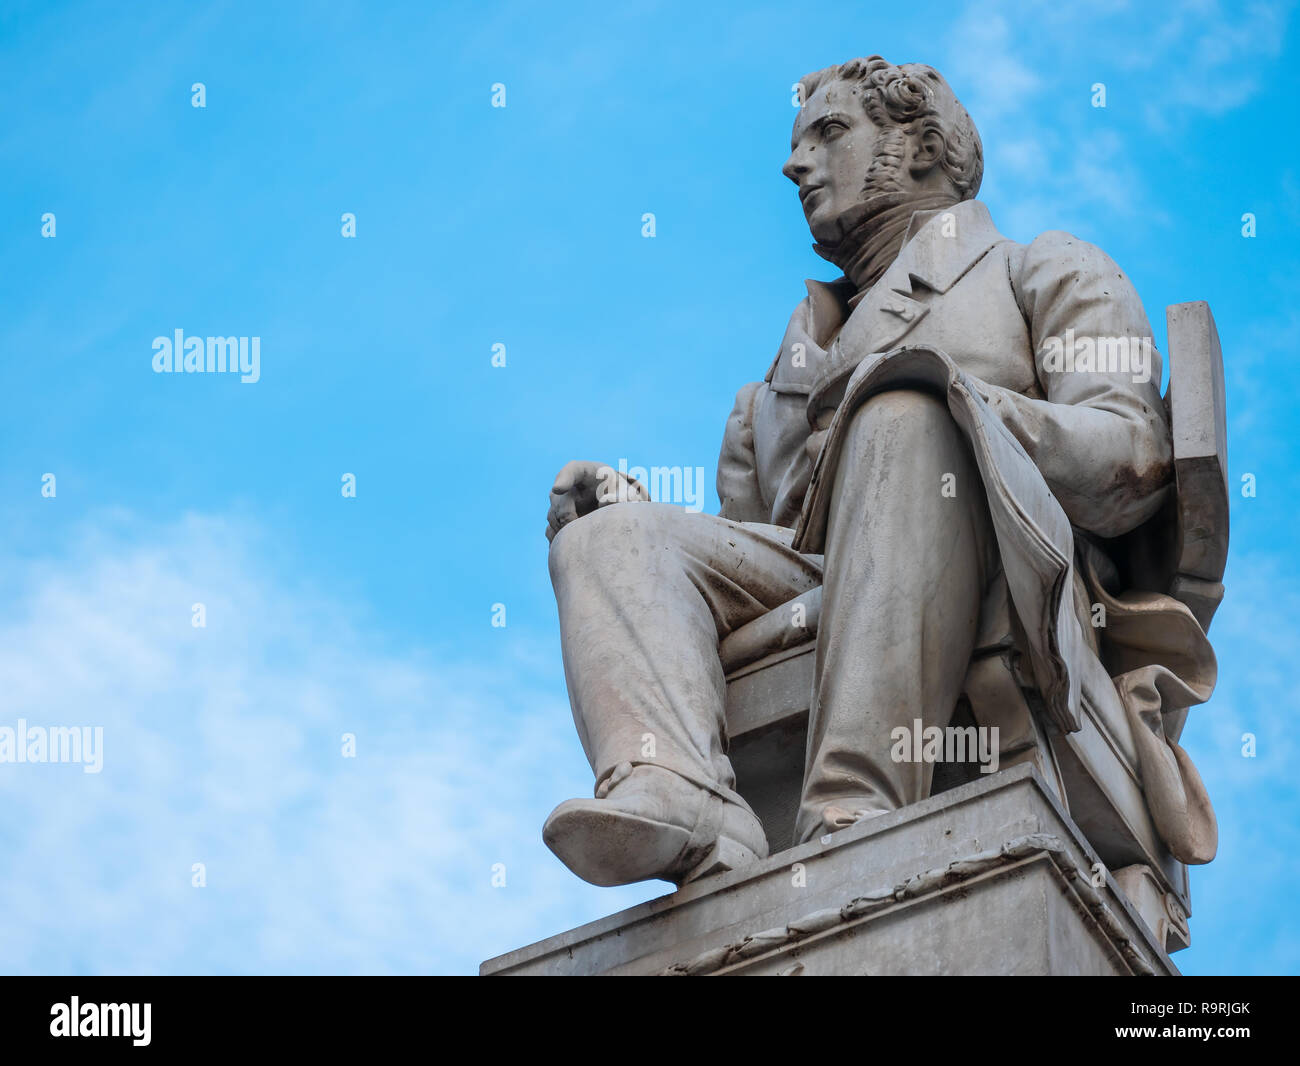 A particular view of the statue of Vincenzo Bellini, a famous Italian composer and one of the most famous nineteenth-century Operists. Horizontal view Stock Photo